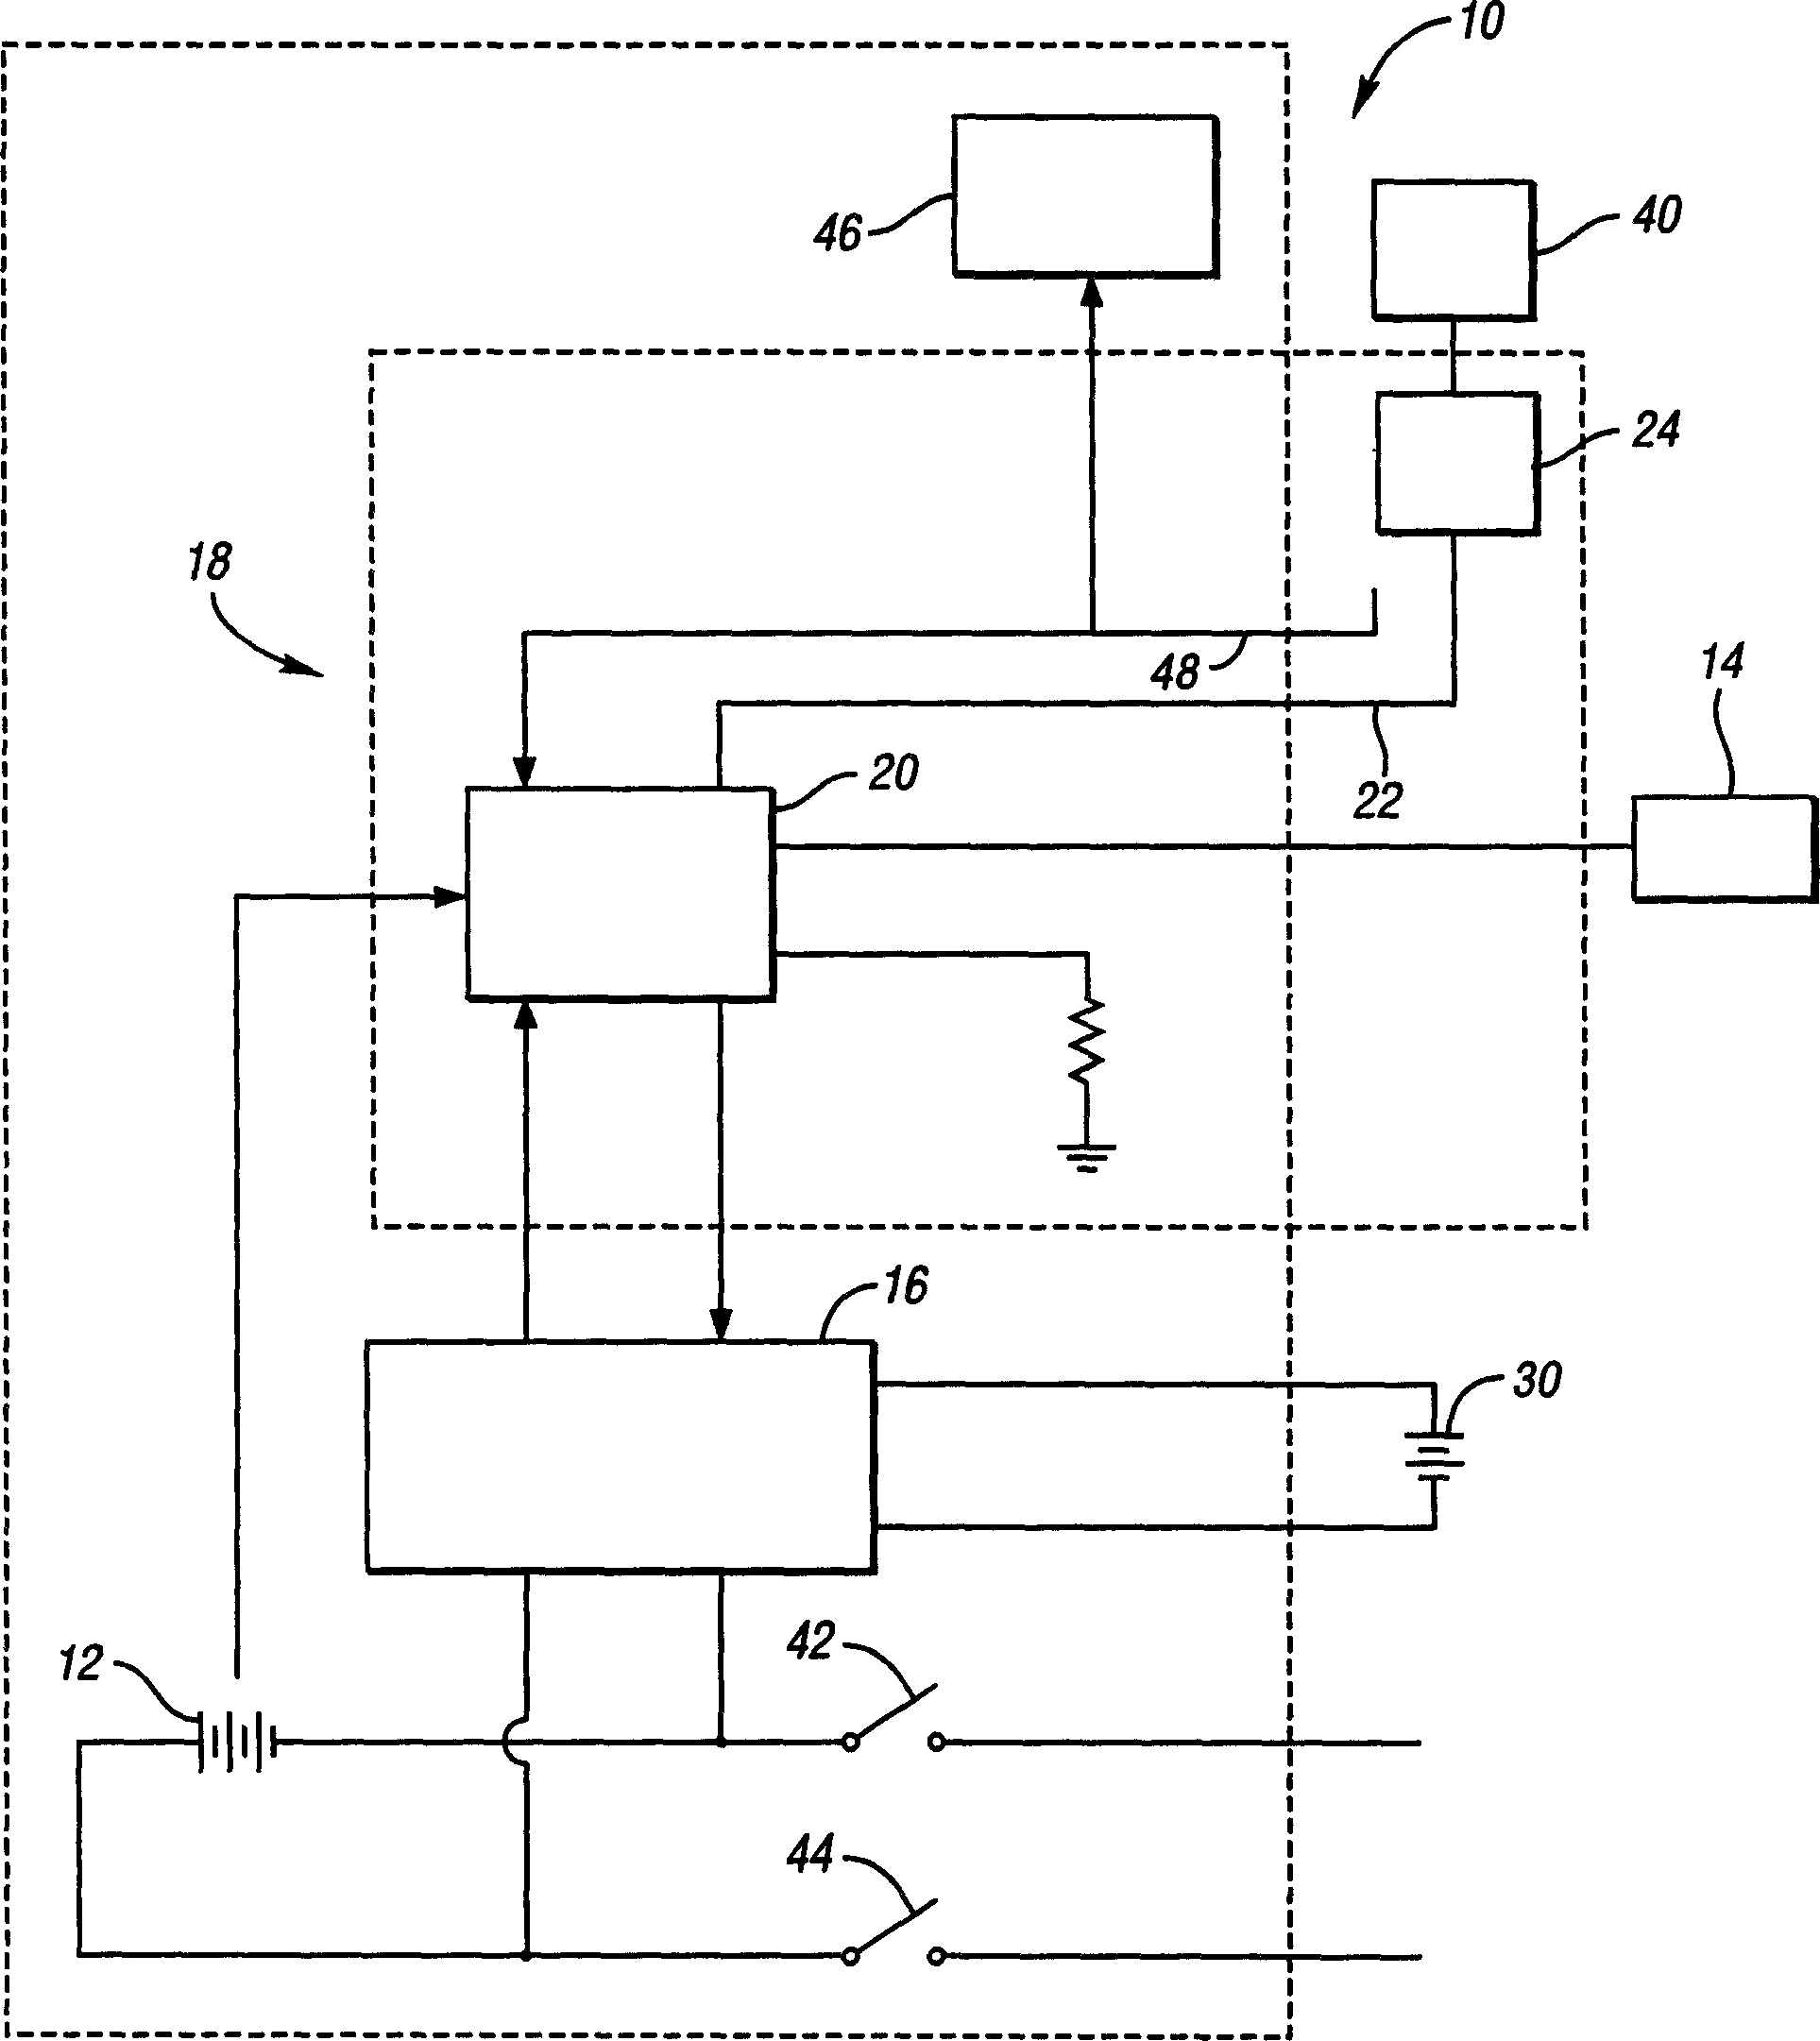 Automatic charging of a high voltage battery in a hybrid electric vehicle